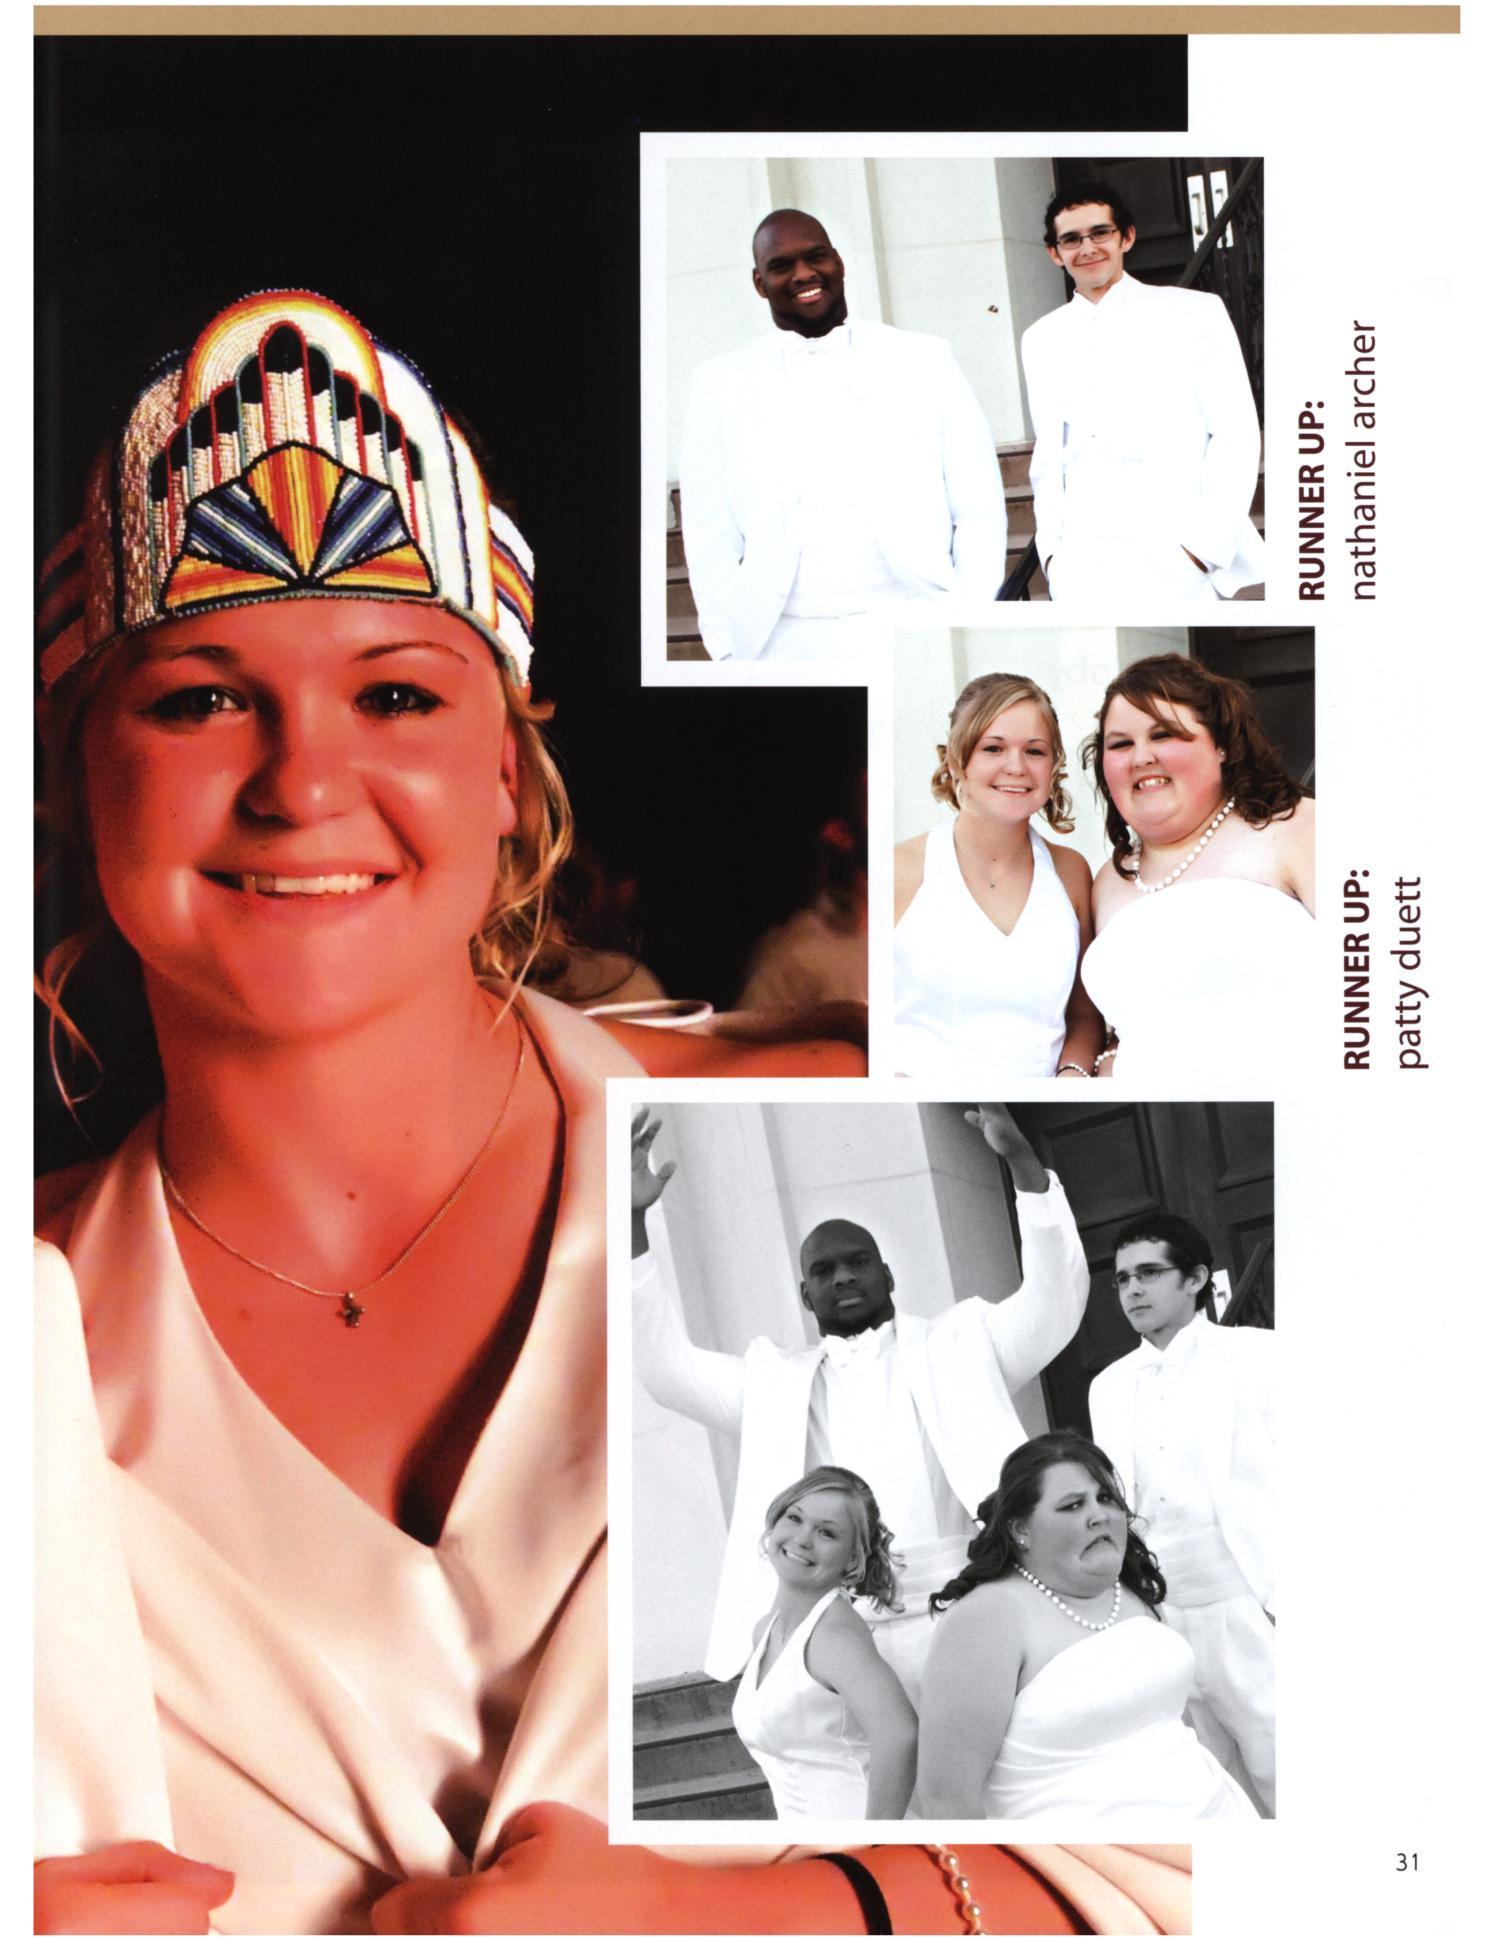 The Totem, Yearbook of McMurry University, 2010
                                                
                                                    31
                                                